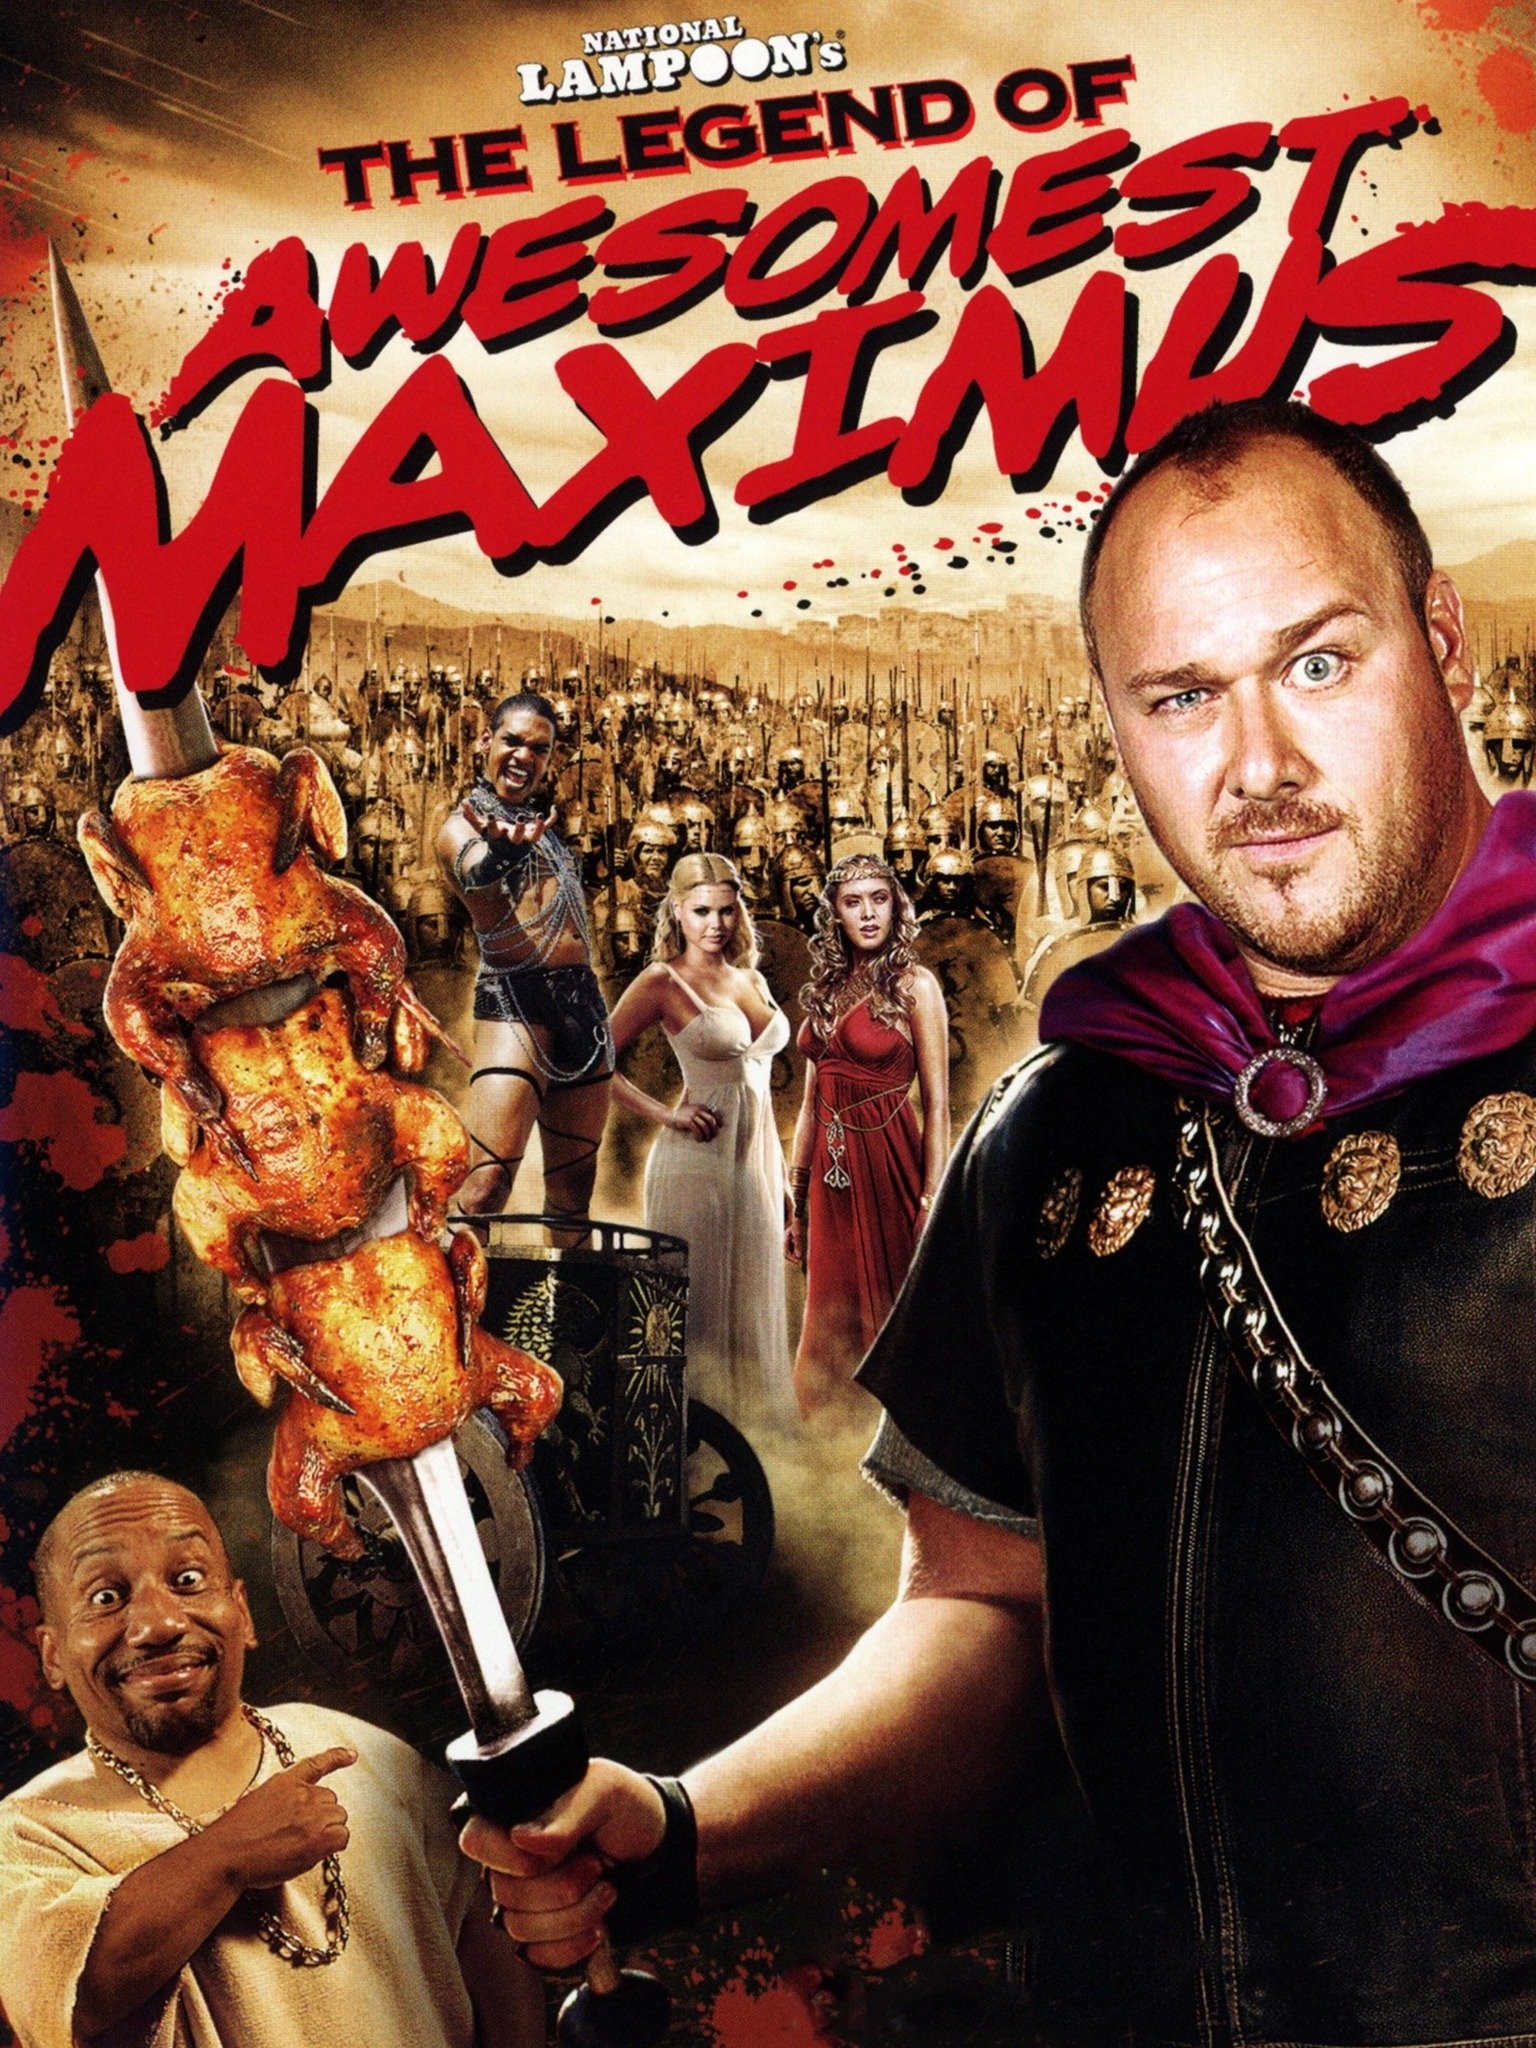 The legend of the awesomest maximus